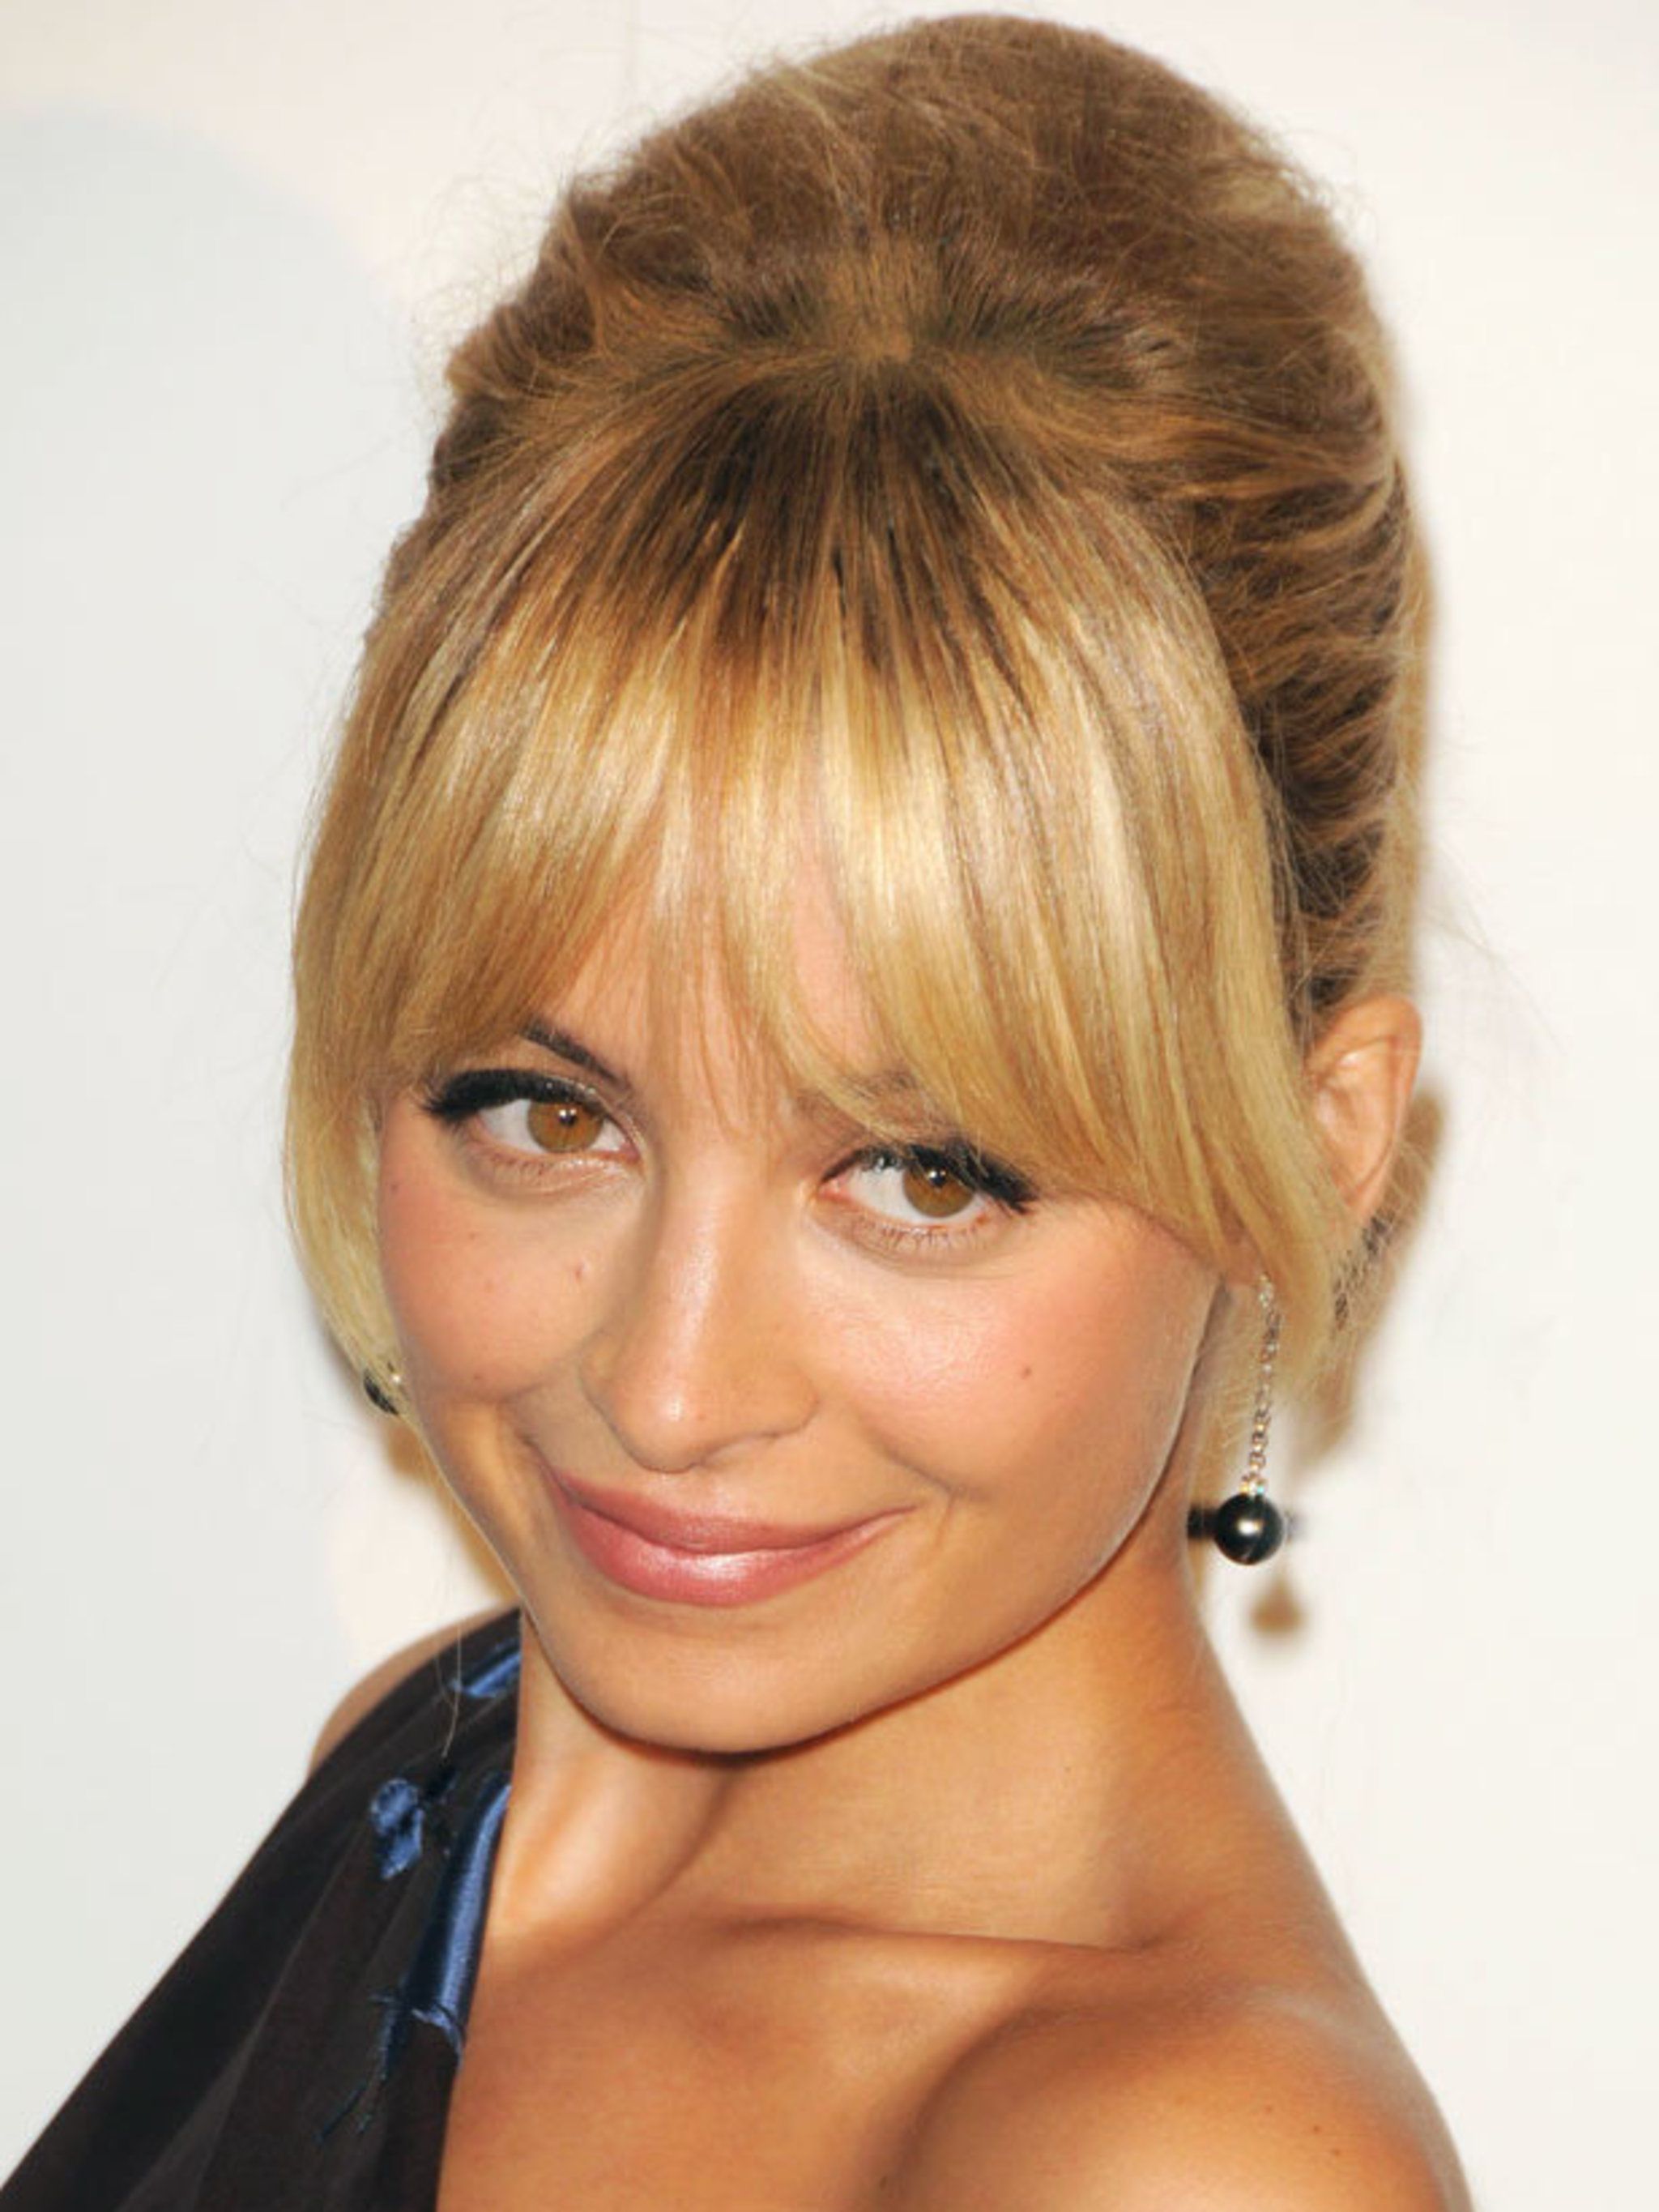 Nicole Richie to launch fragrance